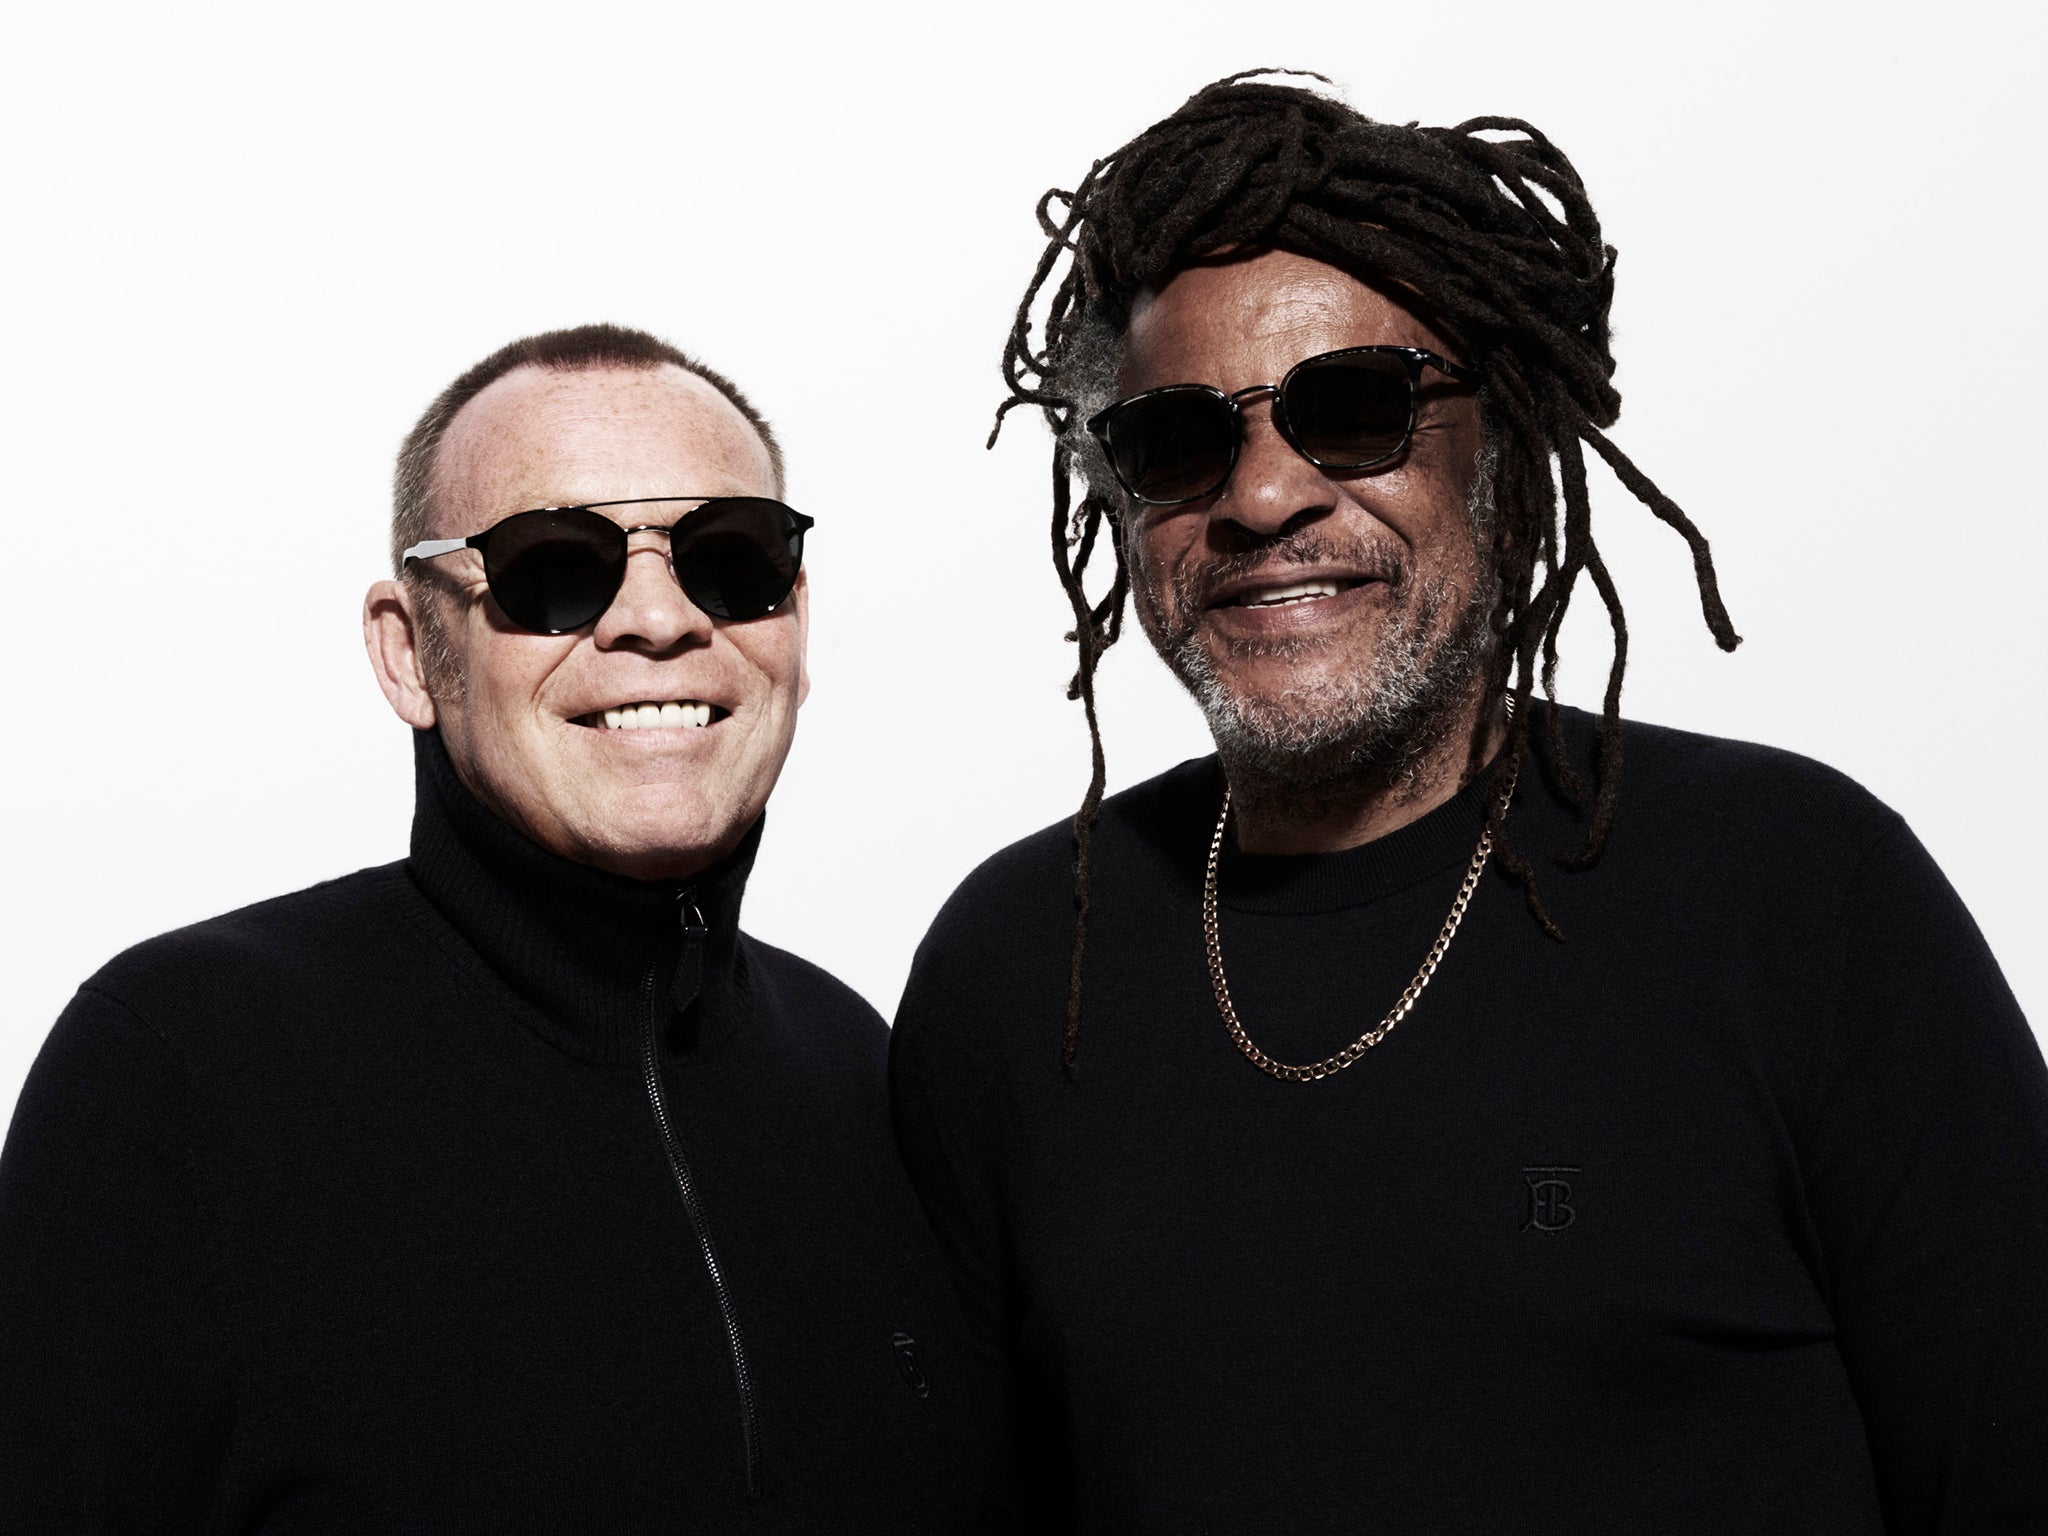 With UB40 lead singer Ali Campbell